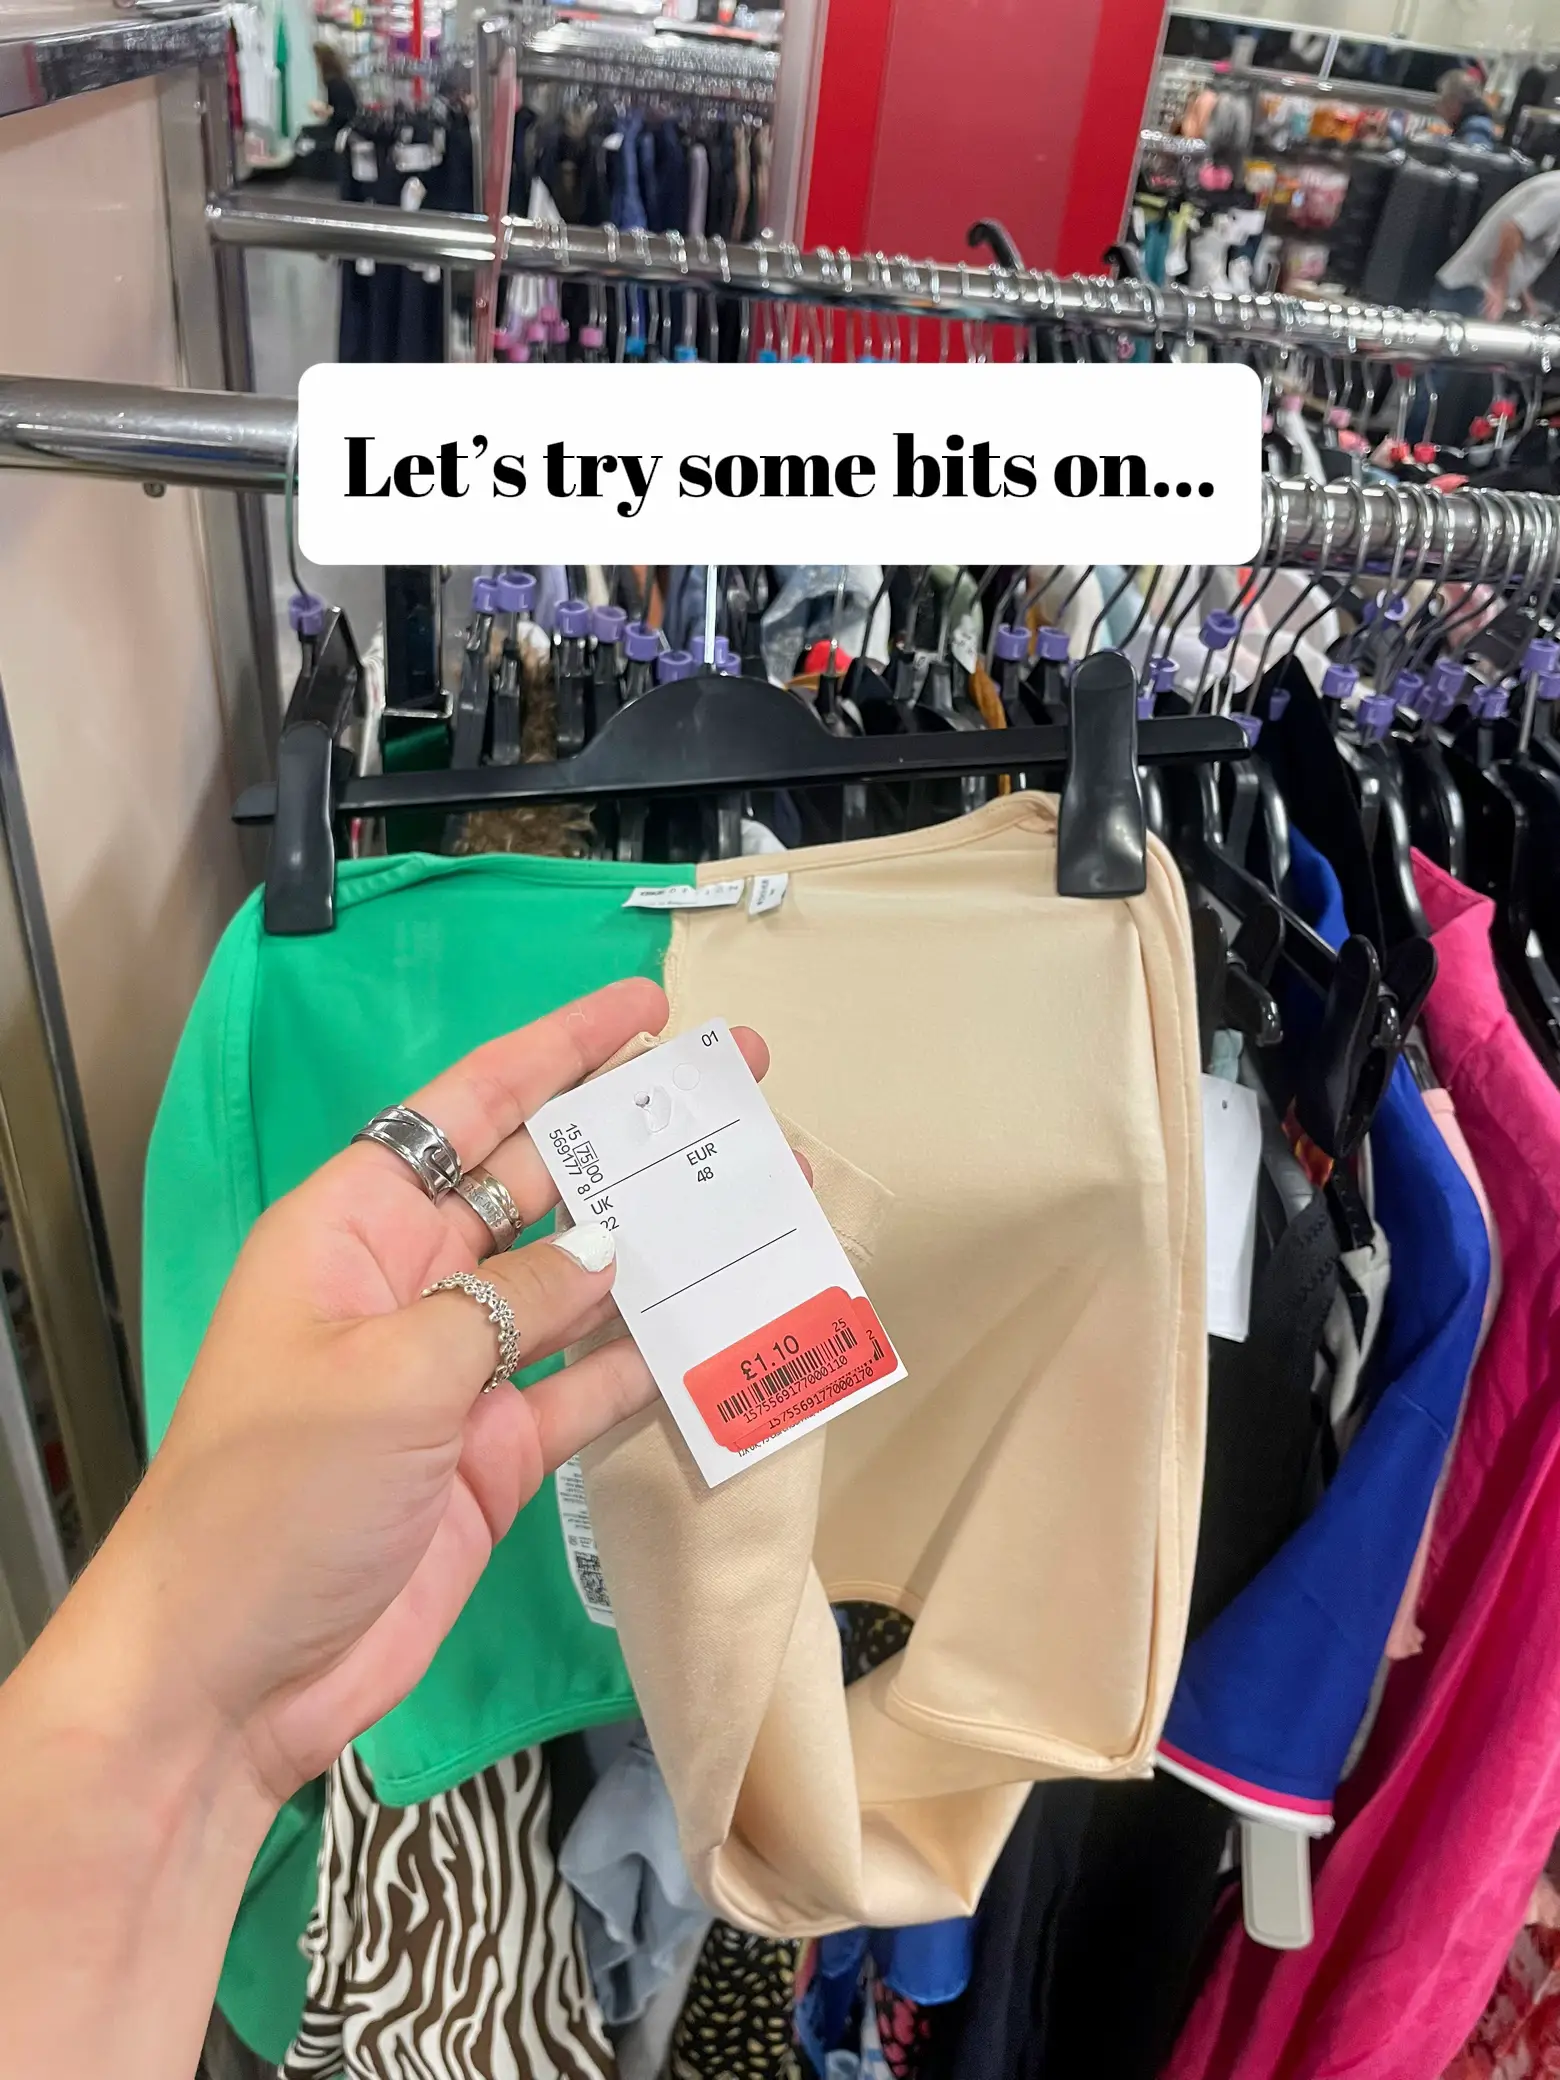 Buckeye Thrift. - Our $1 a bag clothing sale is still